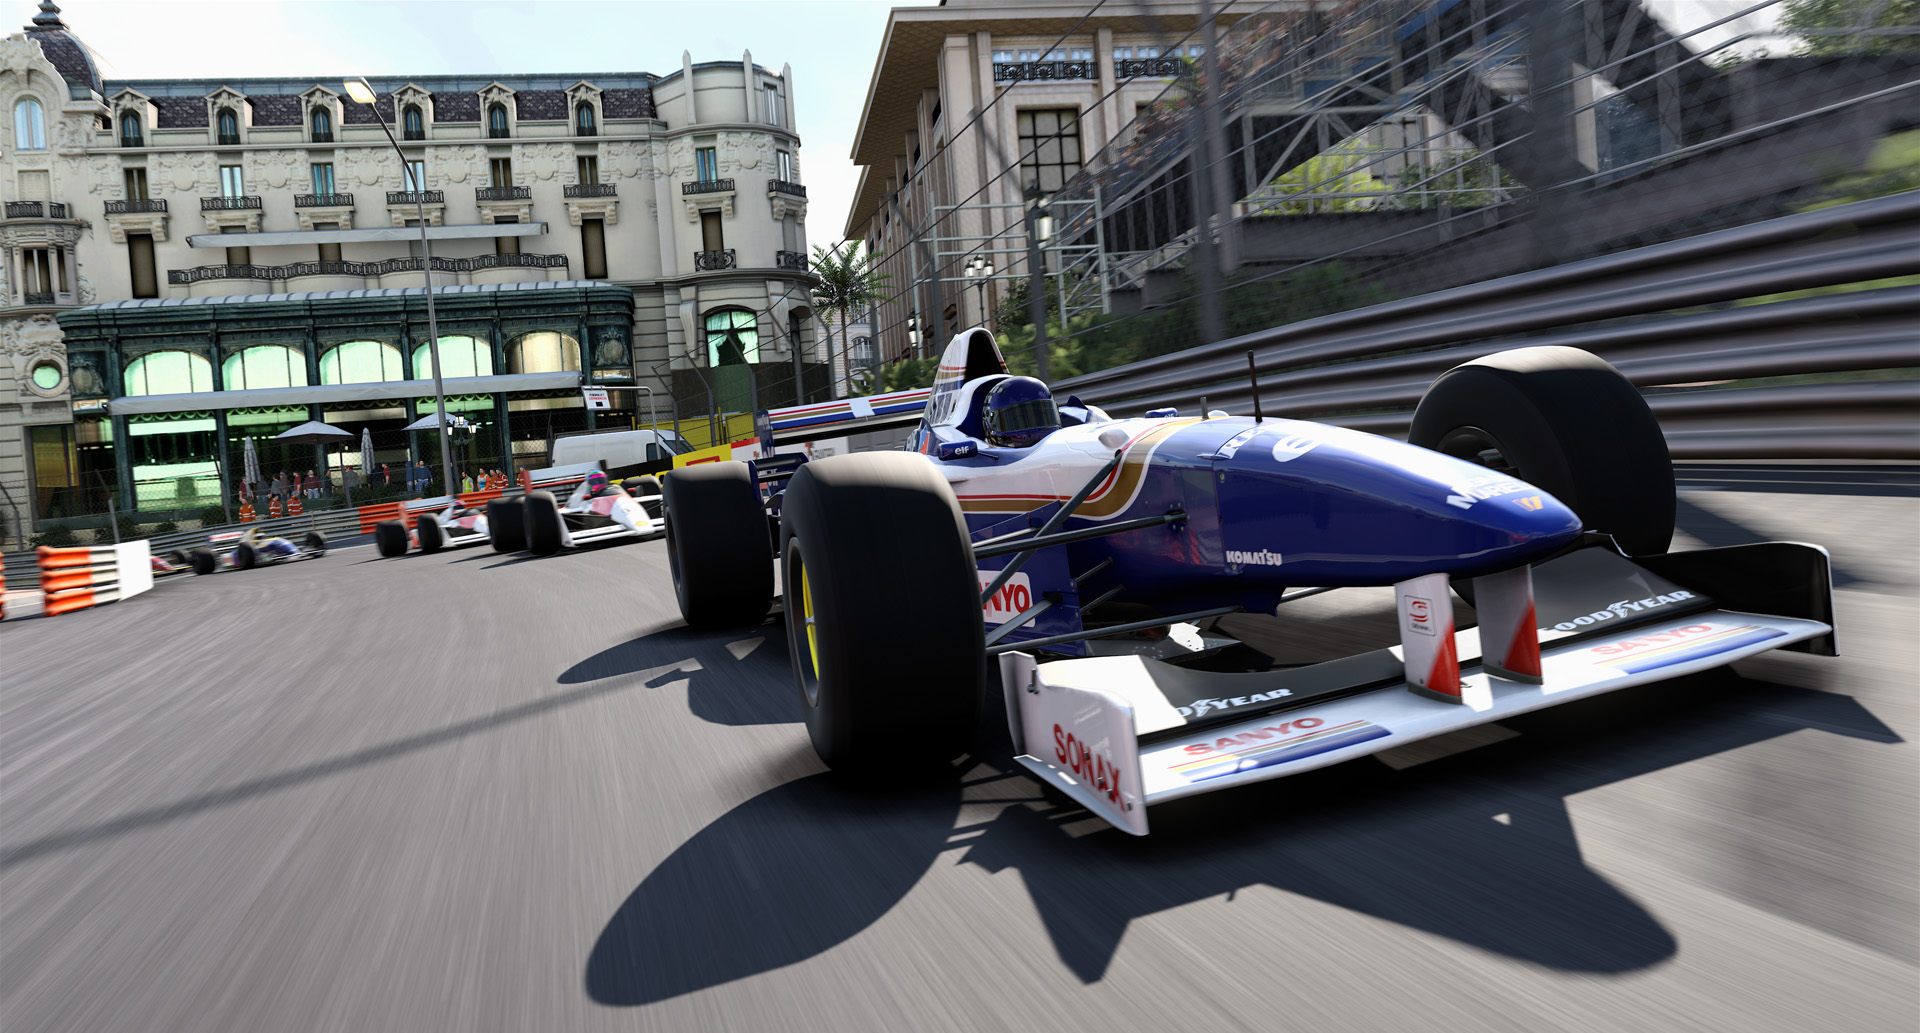 F1 17 Review Codemasters Has Given Us Another Cracking Game Ars Technica